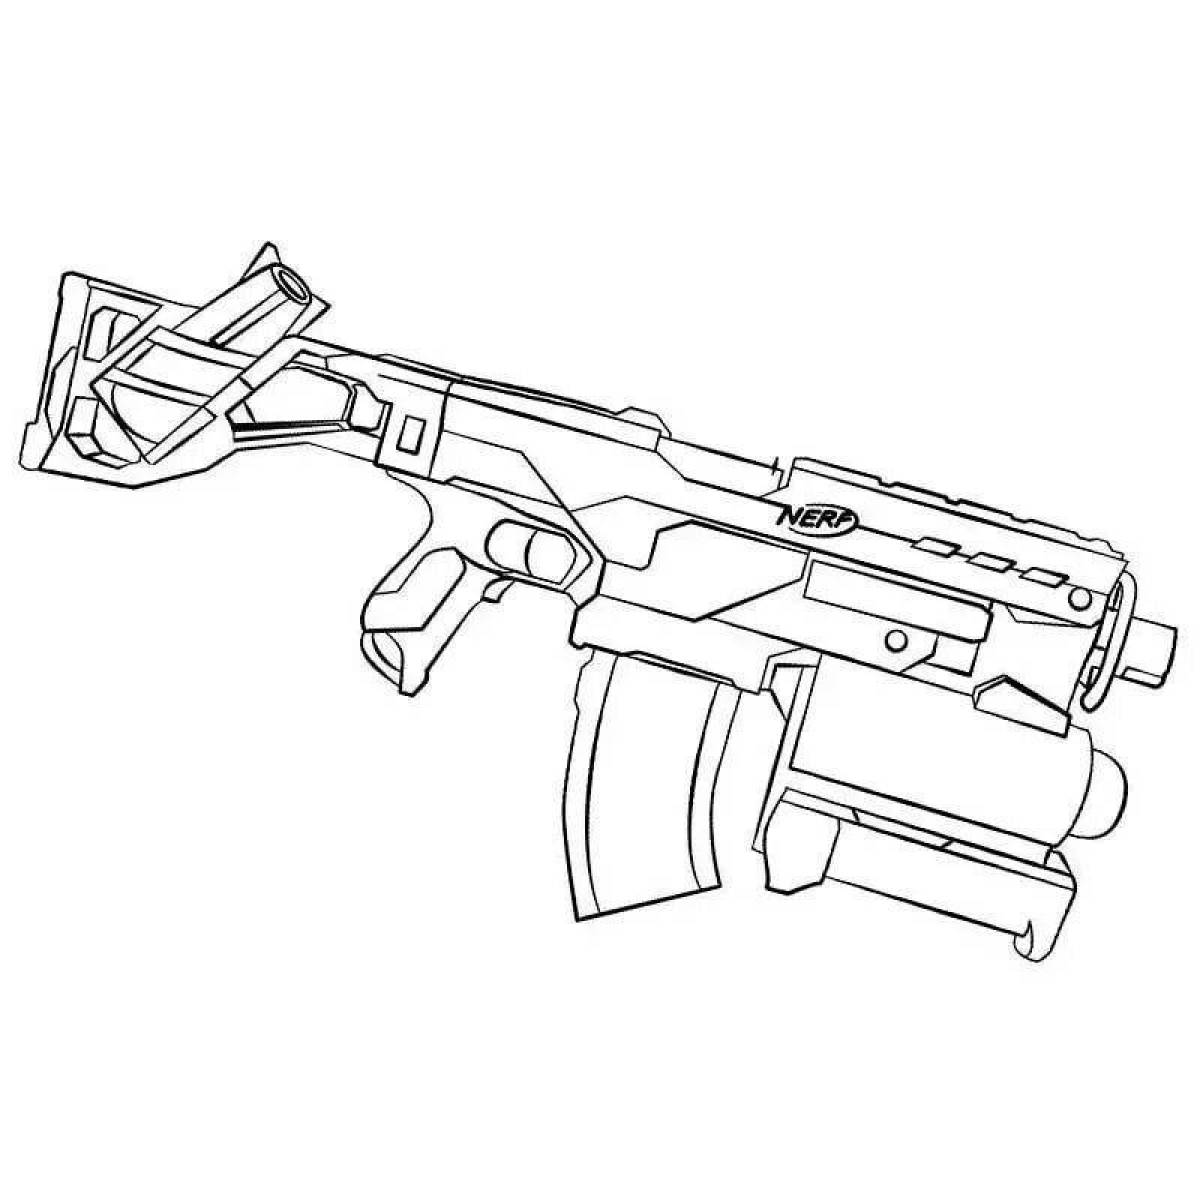 Tempting pistol coloring page